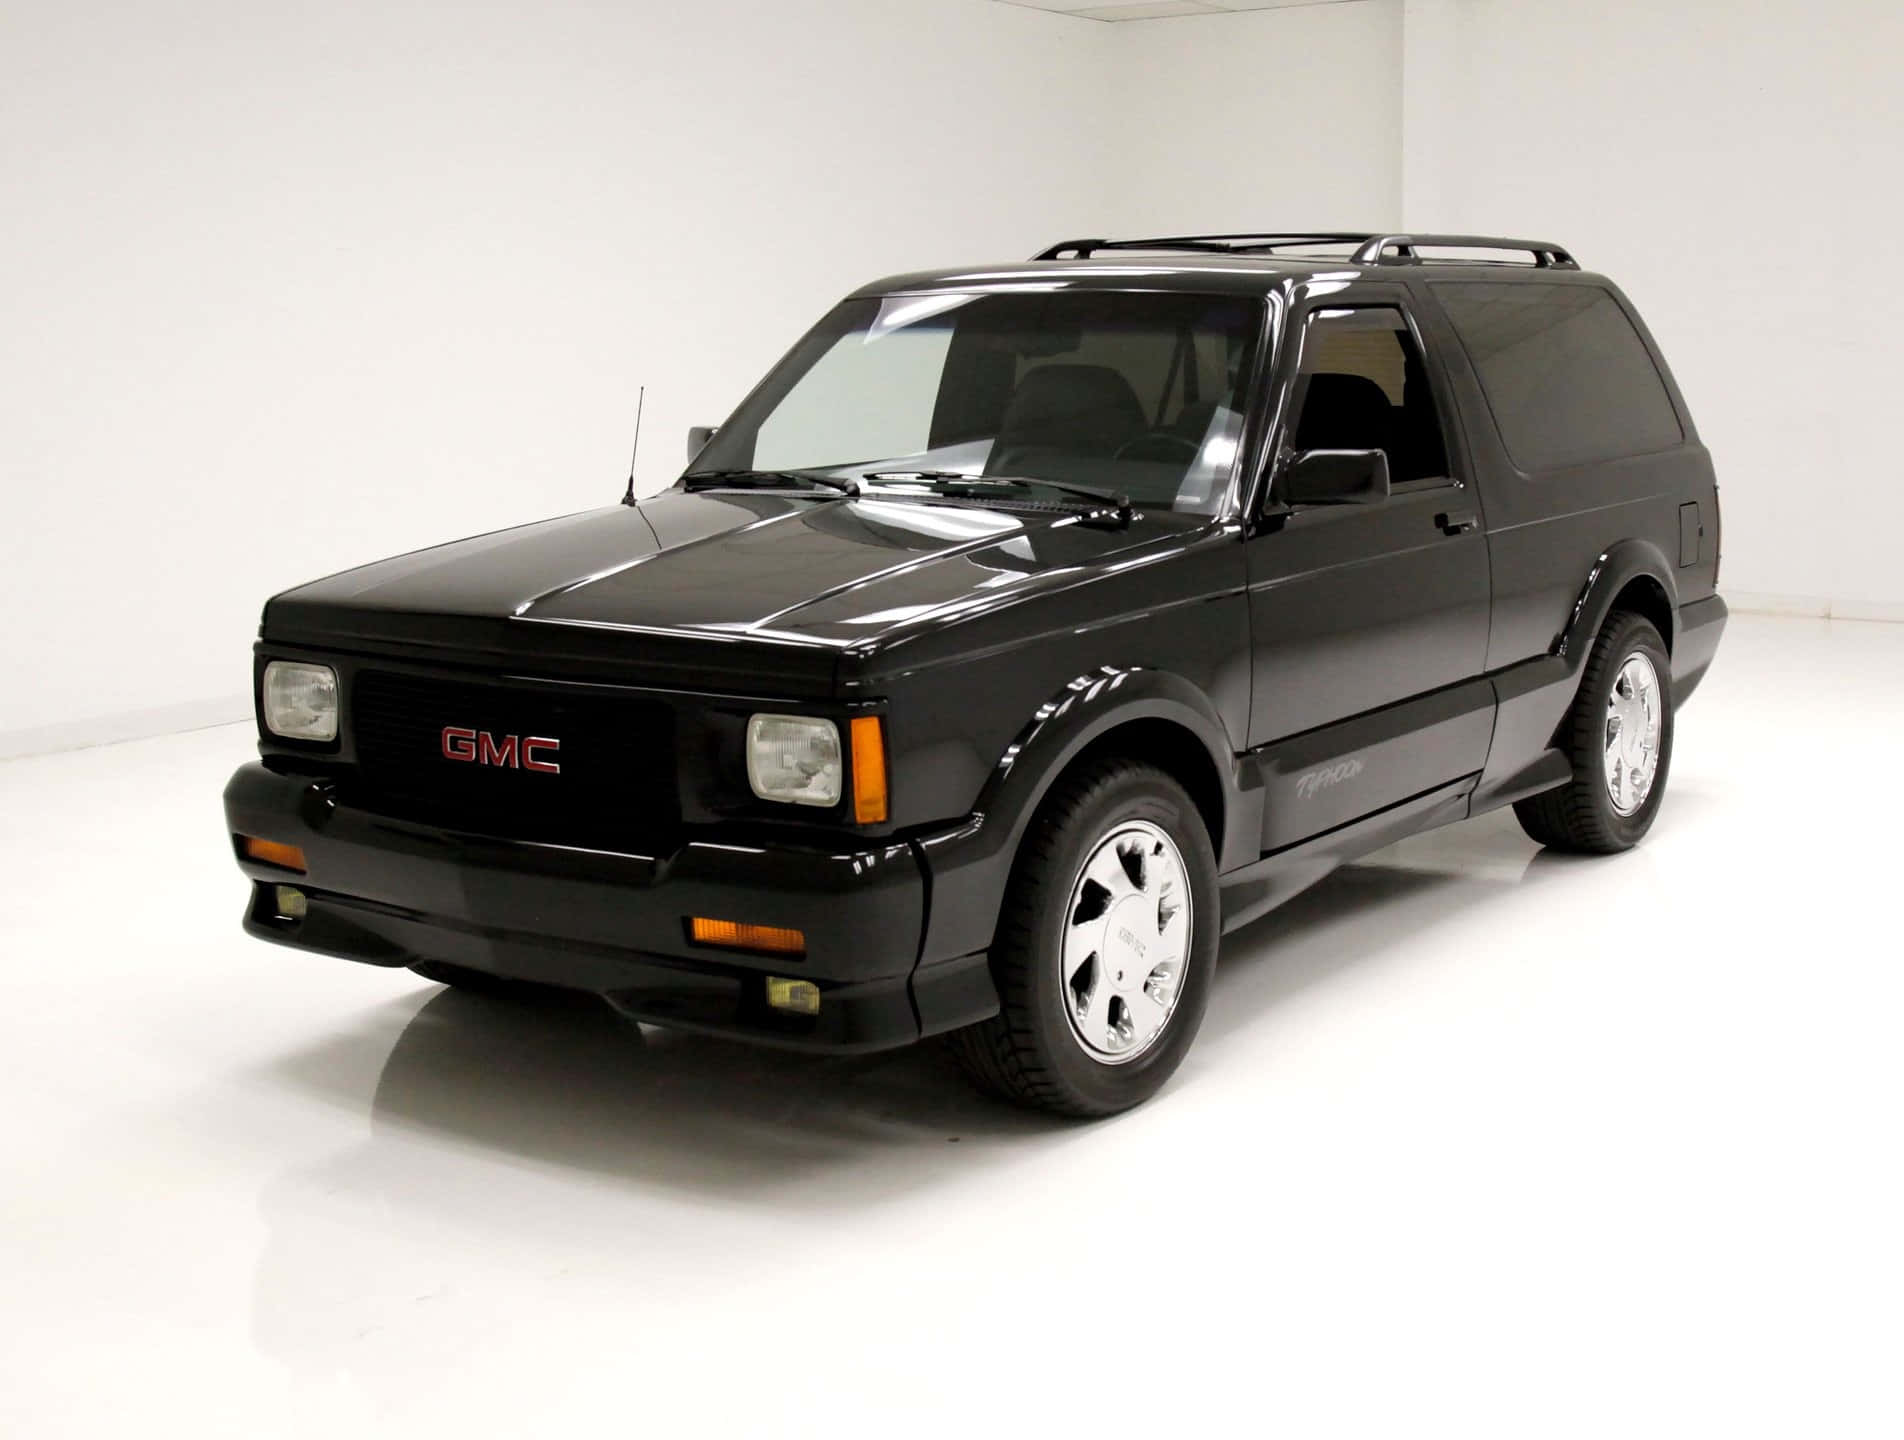 Powerful GMC Typhoon in Action Wallpaper